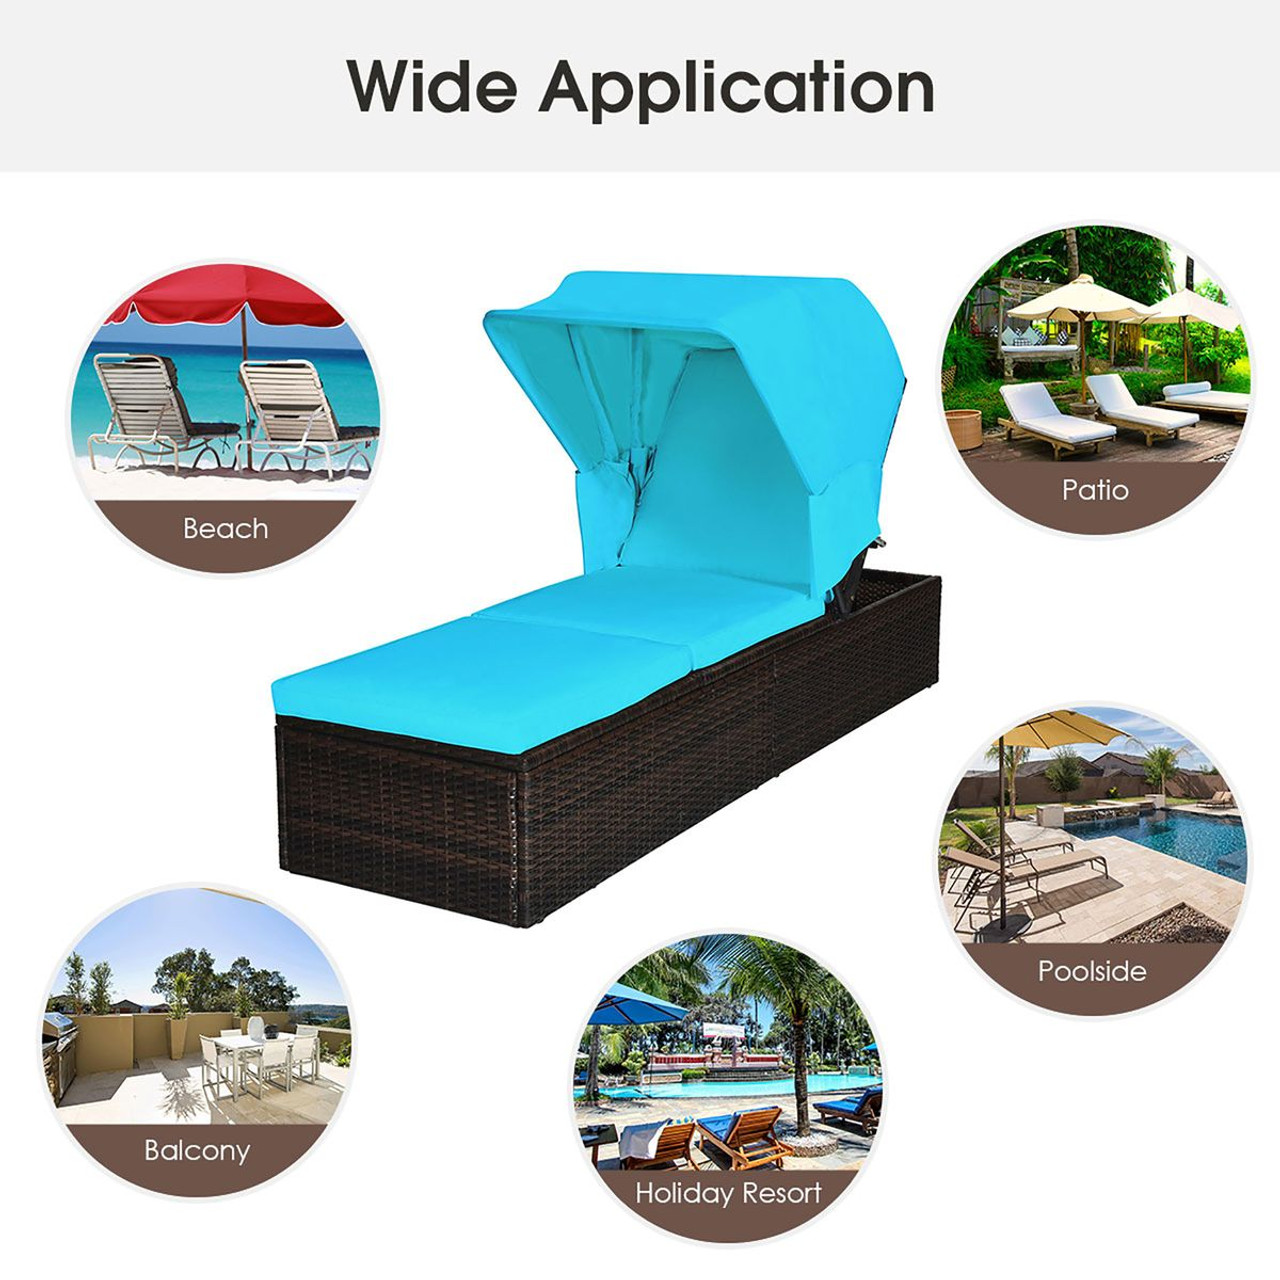 Rattan Lounge Chair with Adjustable Canopy product image